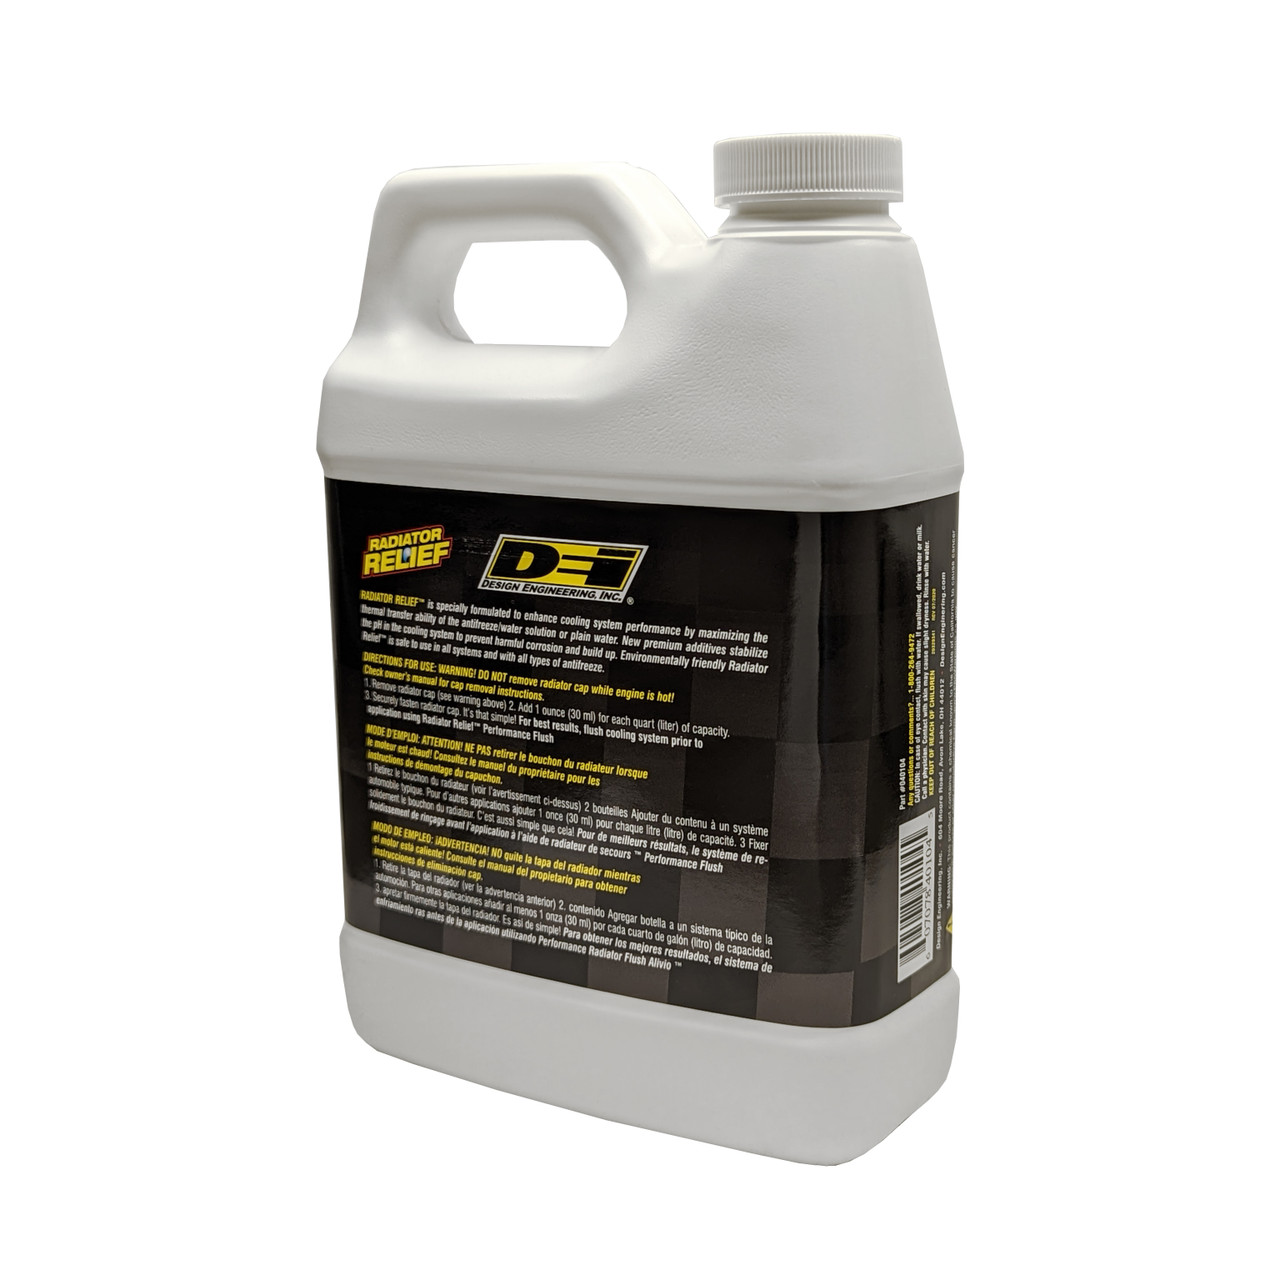 Liquid for internal radiator cleaning, New Line